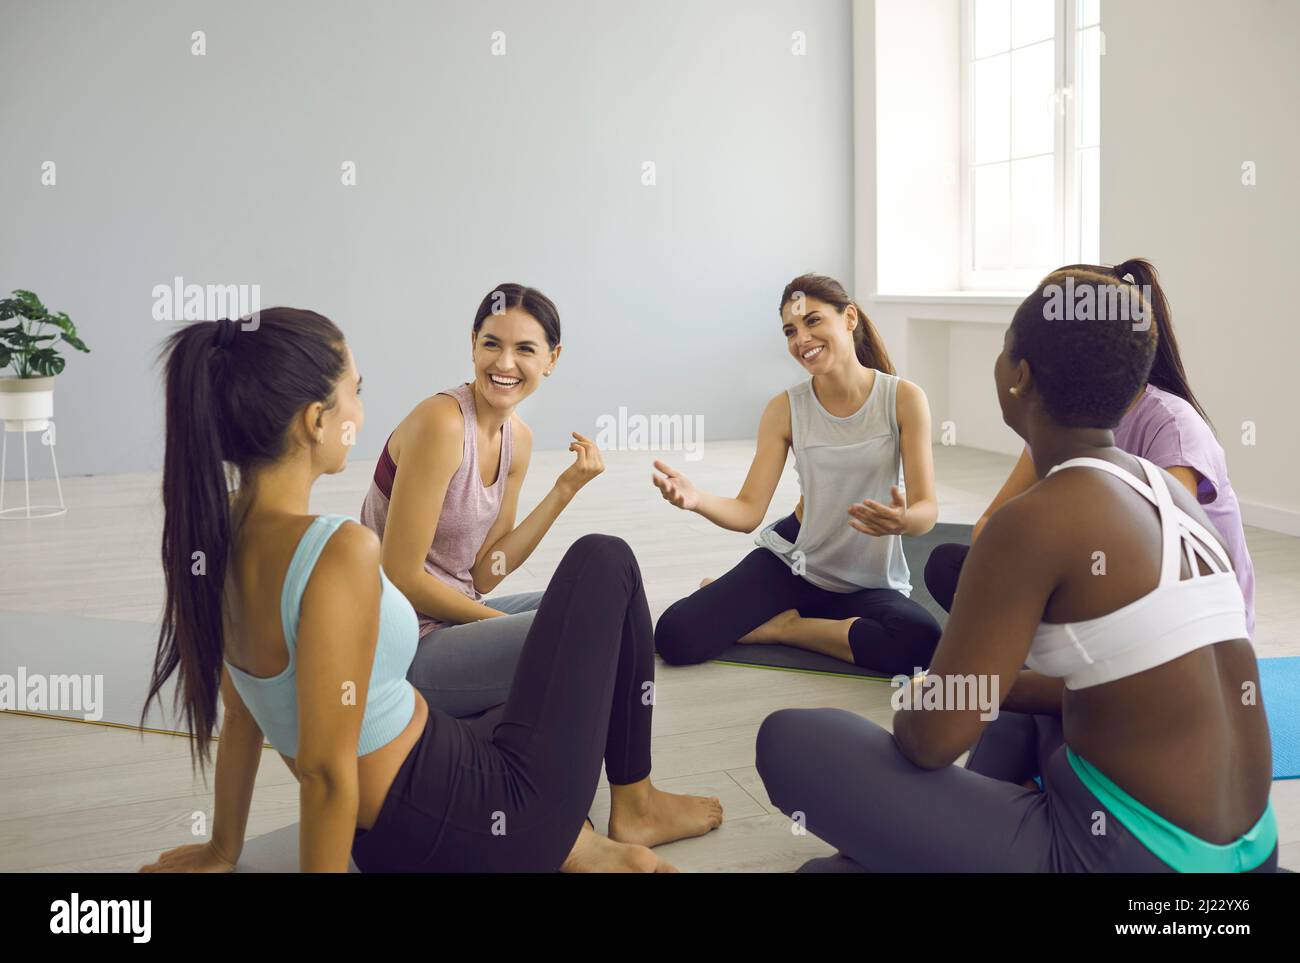 Women laughing together while sitting on yoga mats in a fitness